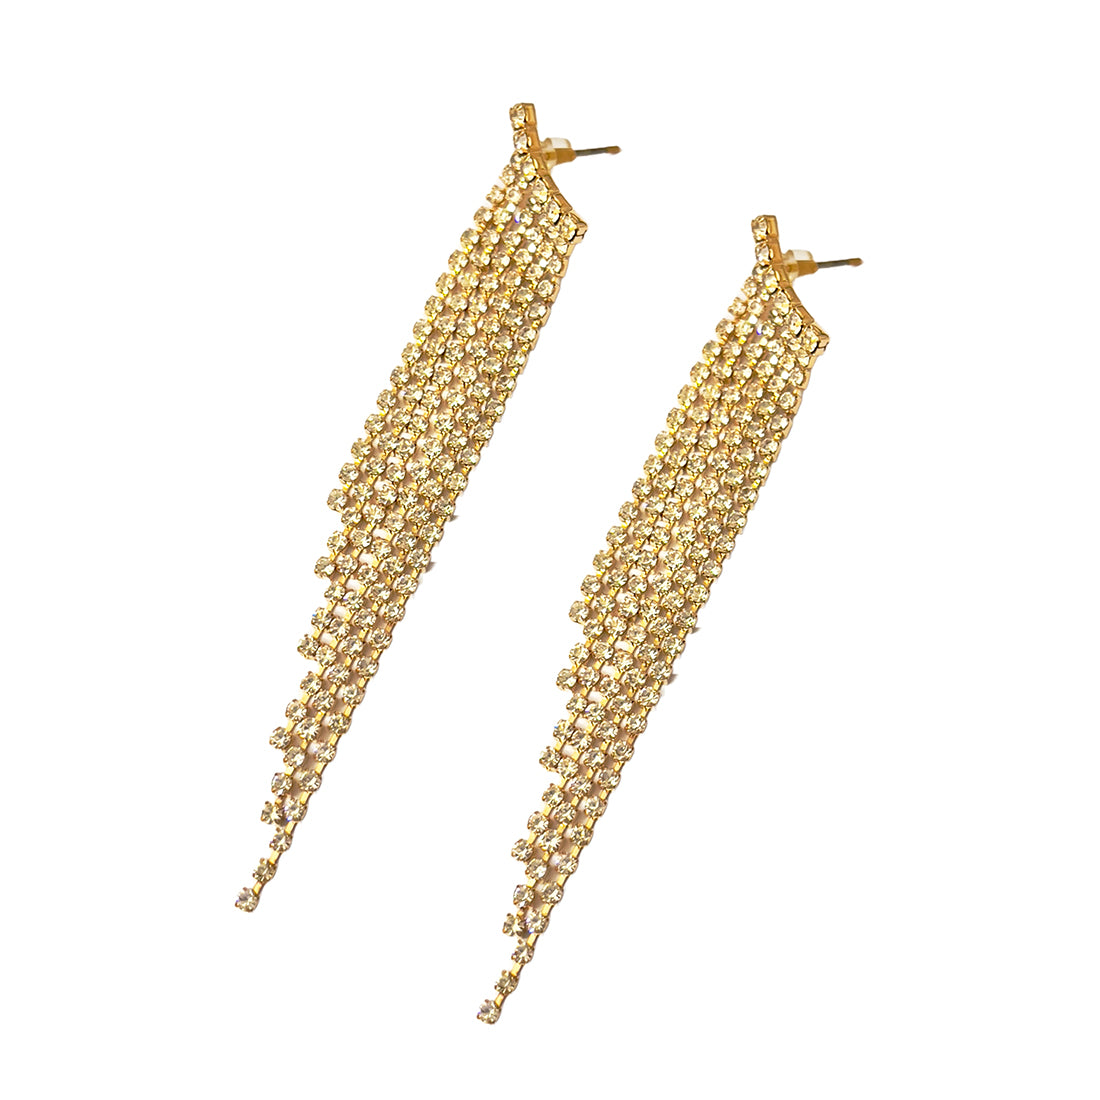 Contemporary White Diamante Crystal Studded Gold-Toned Asymmetric Long Tassel Drop Earrings